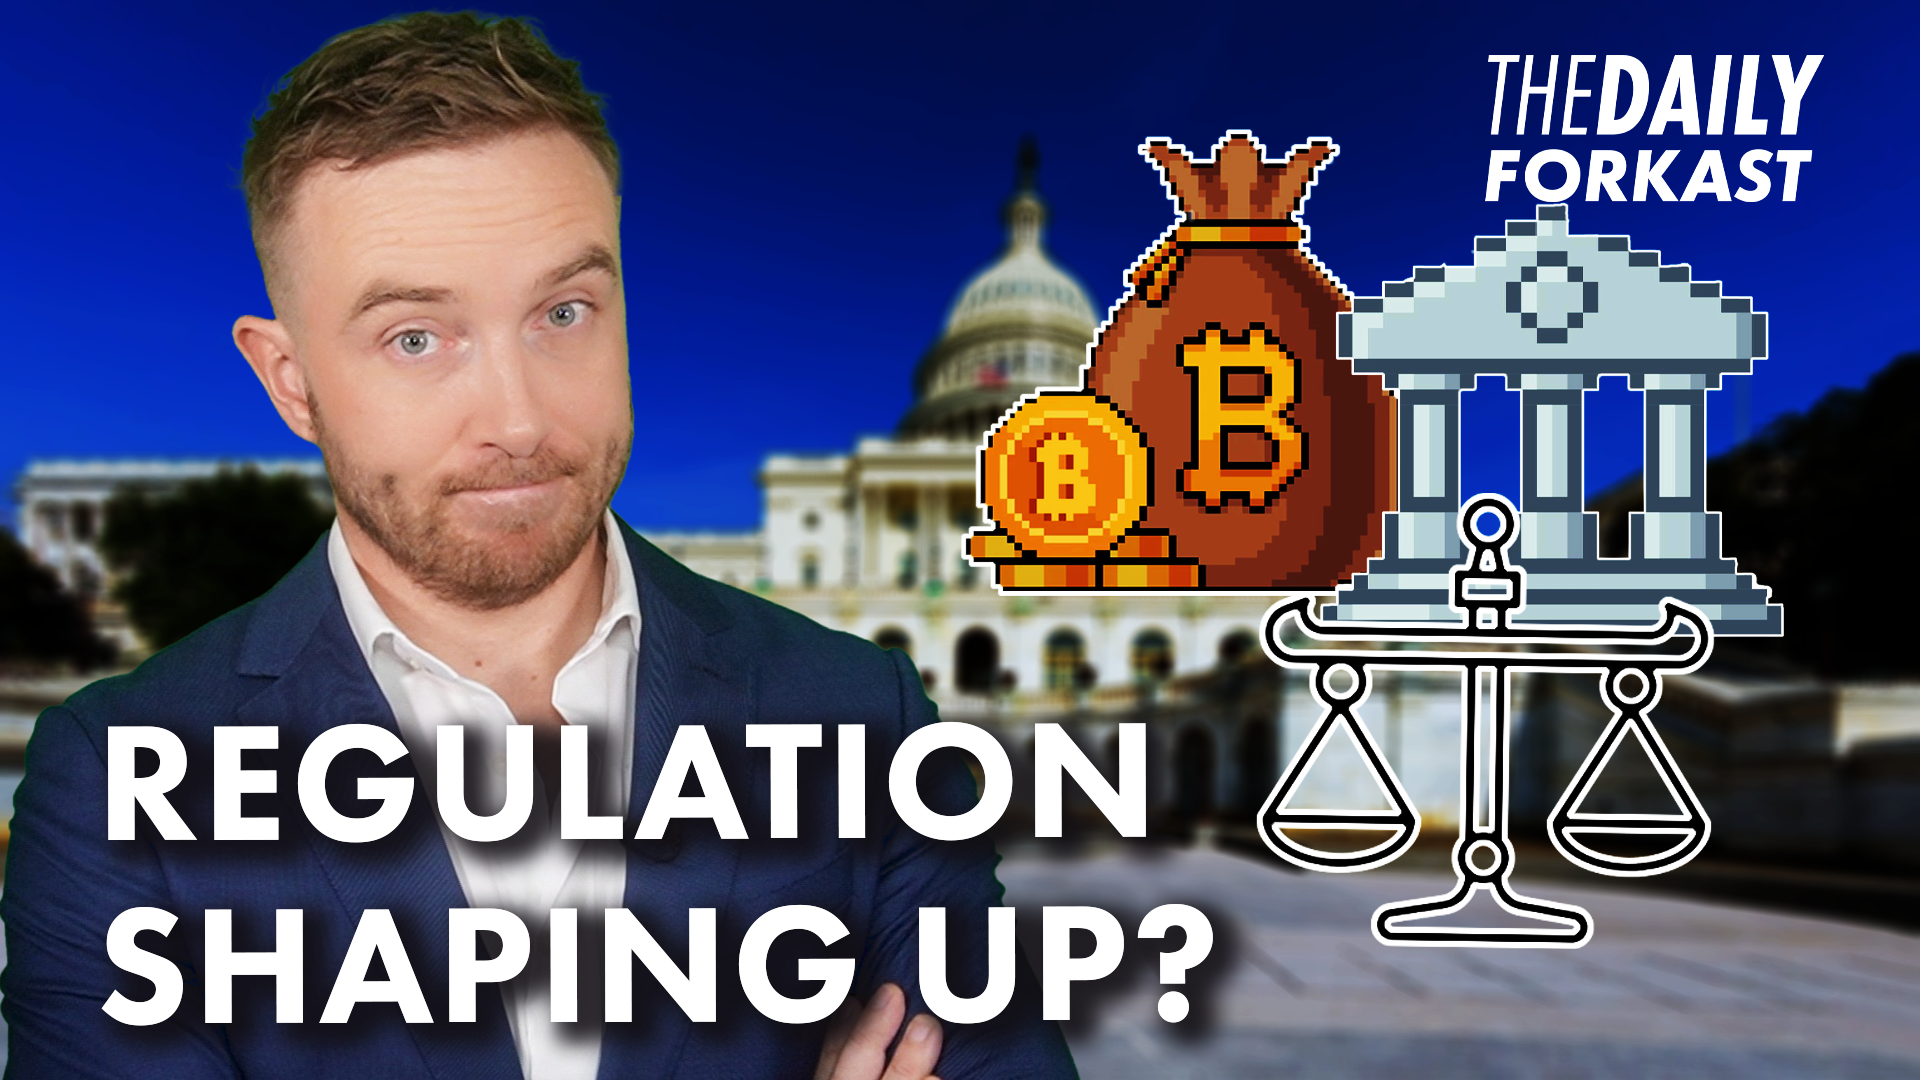 Crypto scandals in 2022 prompted questions about regulation